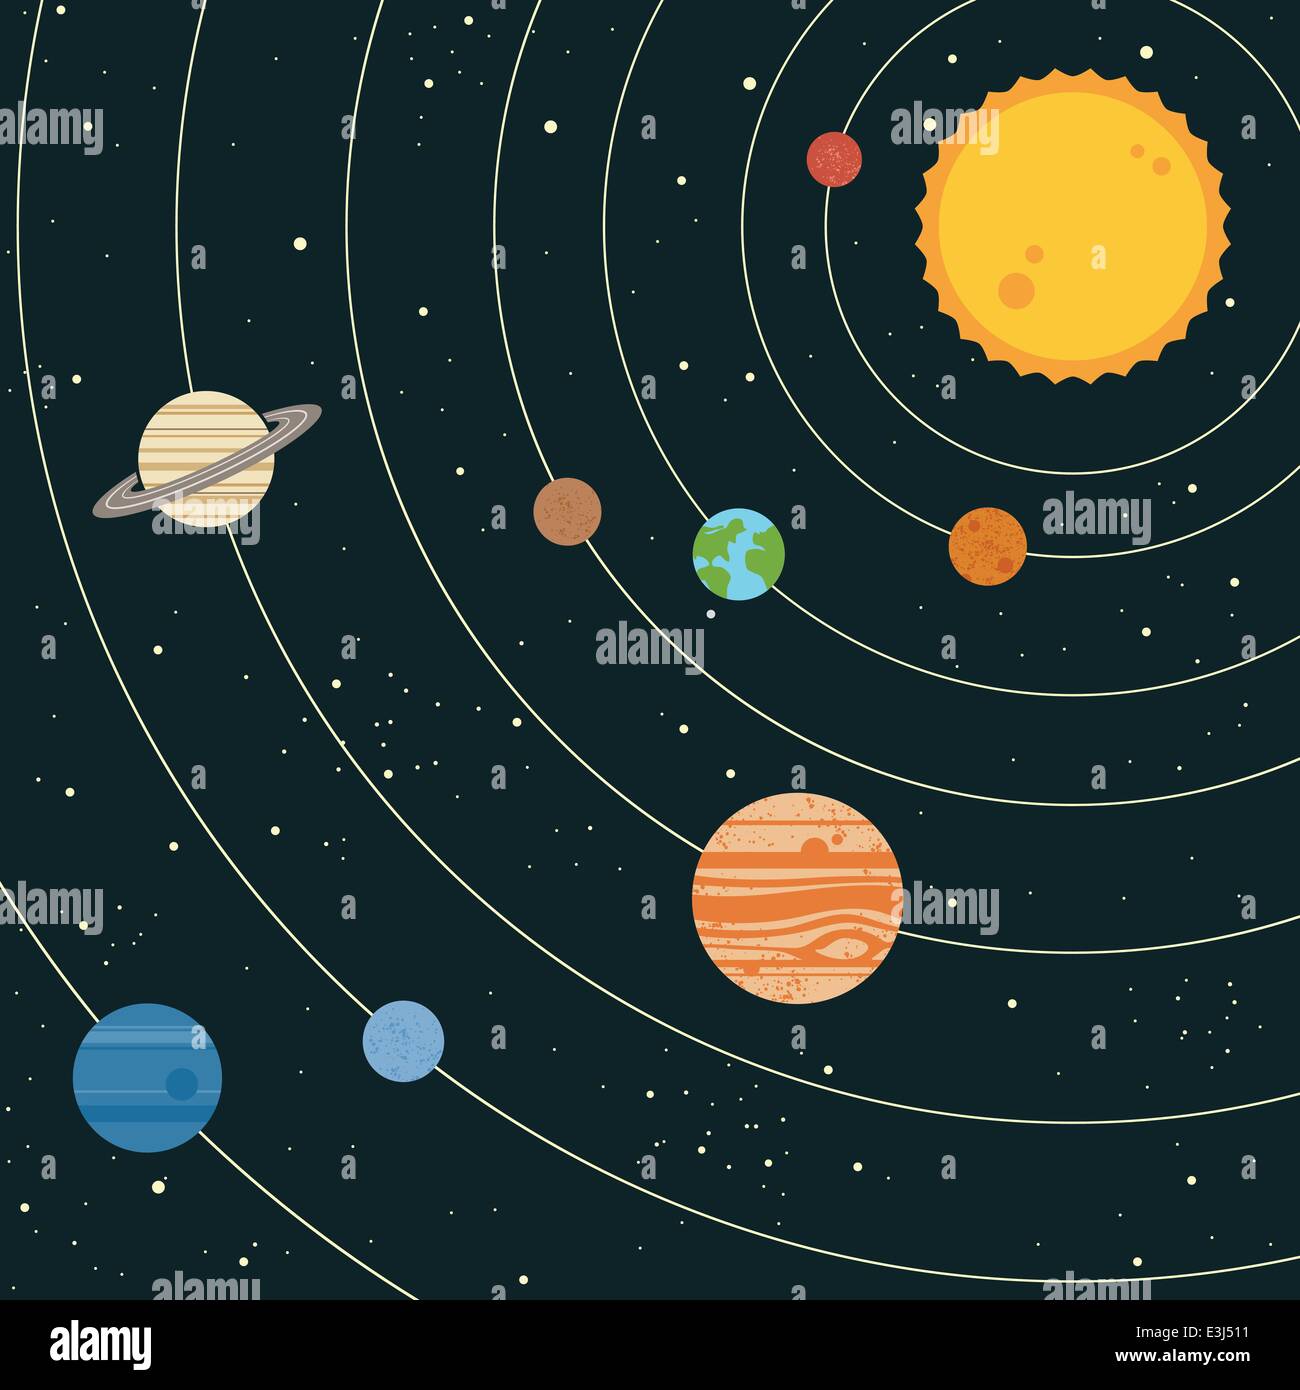 Vintage style solar system illustration with planets and sun Stock Vector